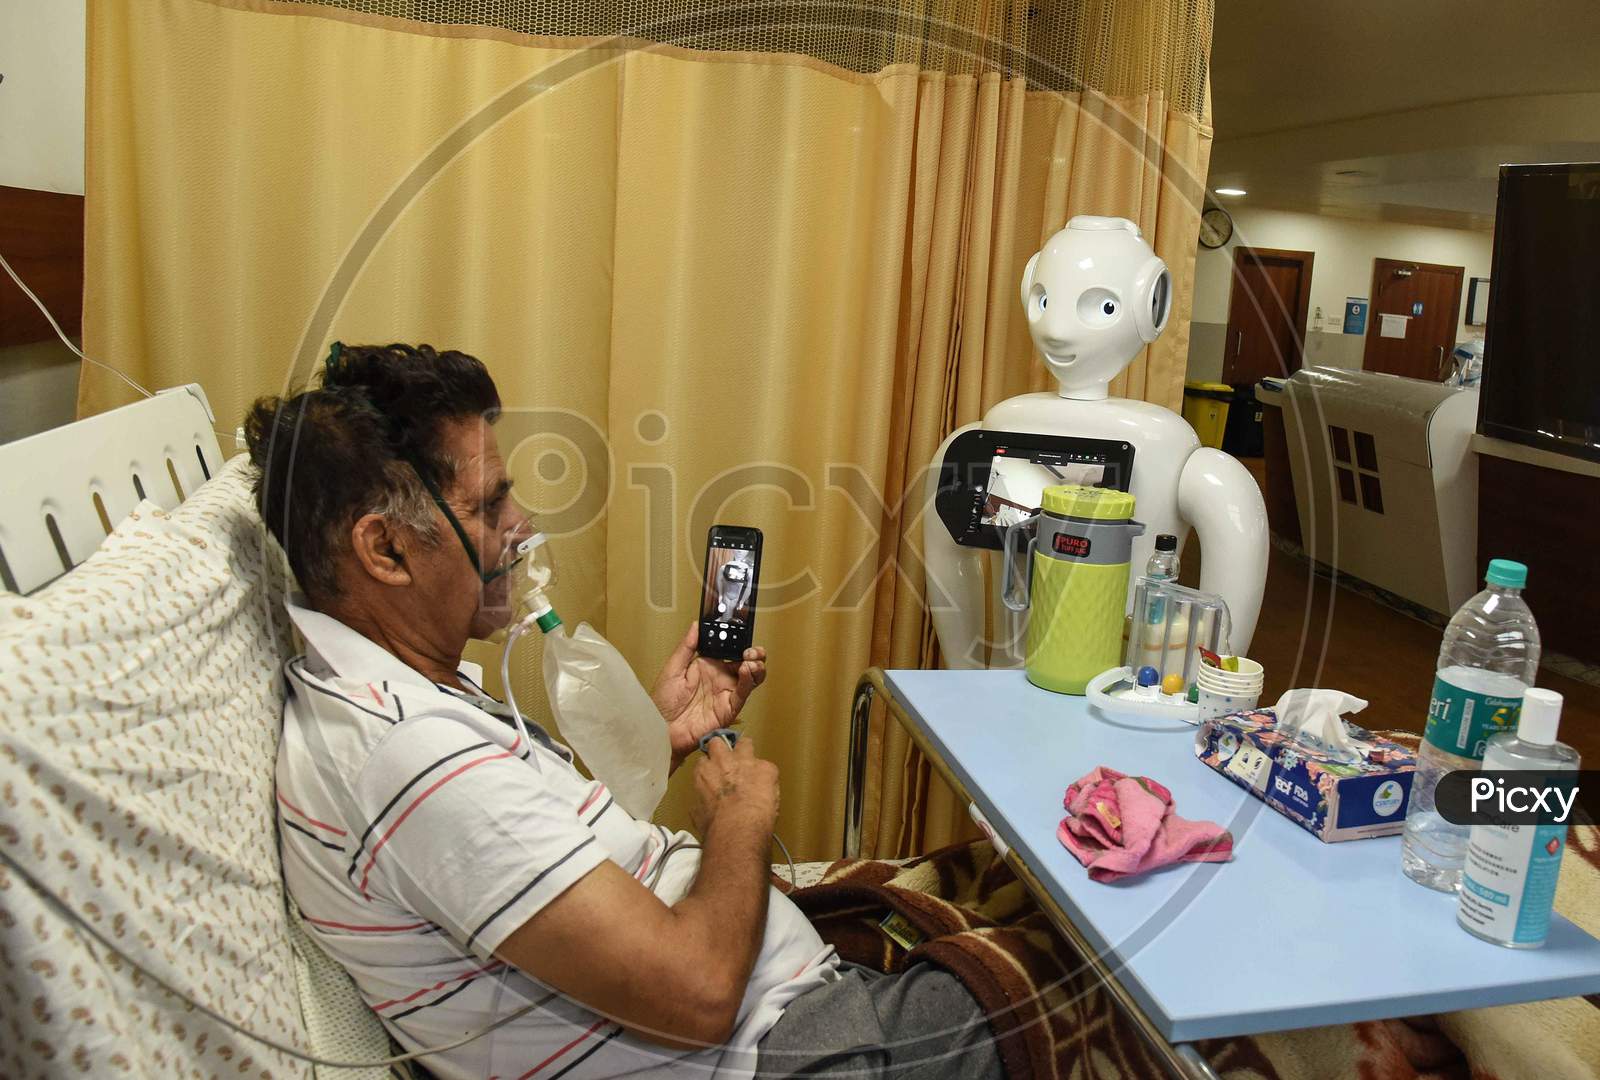 A Private hospital deployed a Robot for the communication in between admitted patients and their families at an ICU Covid ward in Greater Noida. Apart from video call the robot can also record the activities including symptom and thermal checking inside the ICU ward. September 14, 2020.